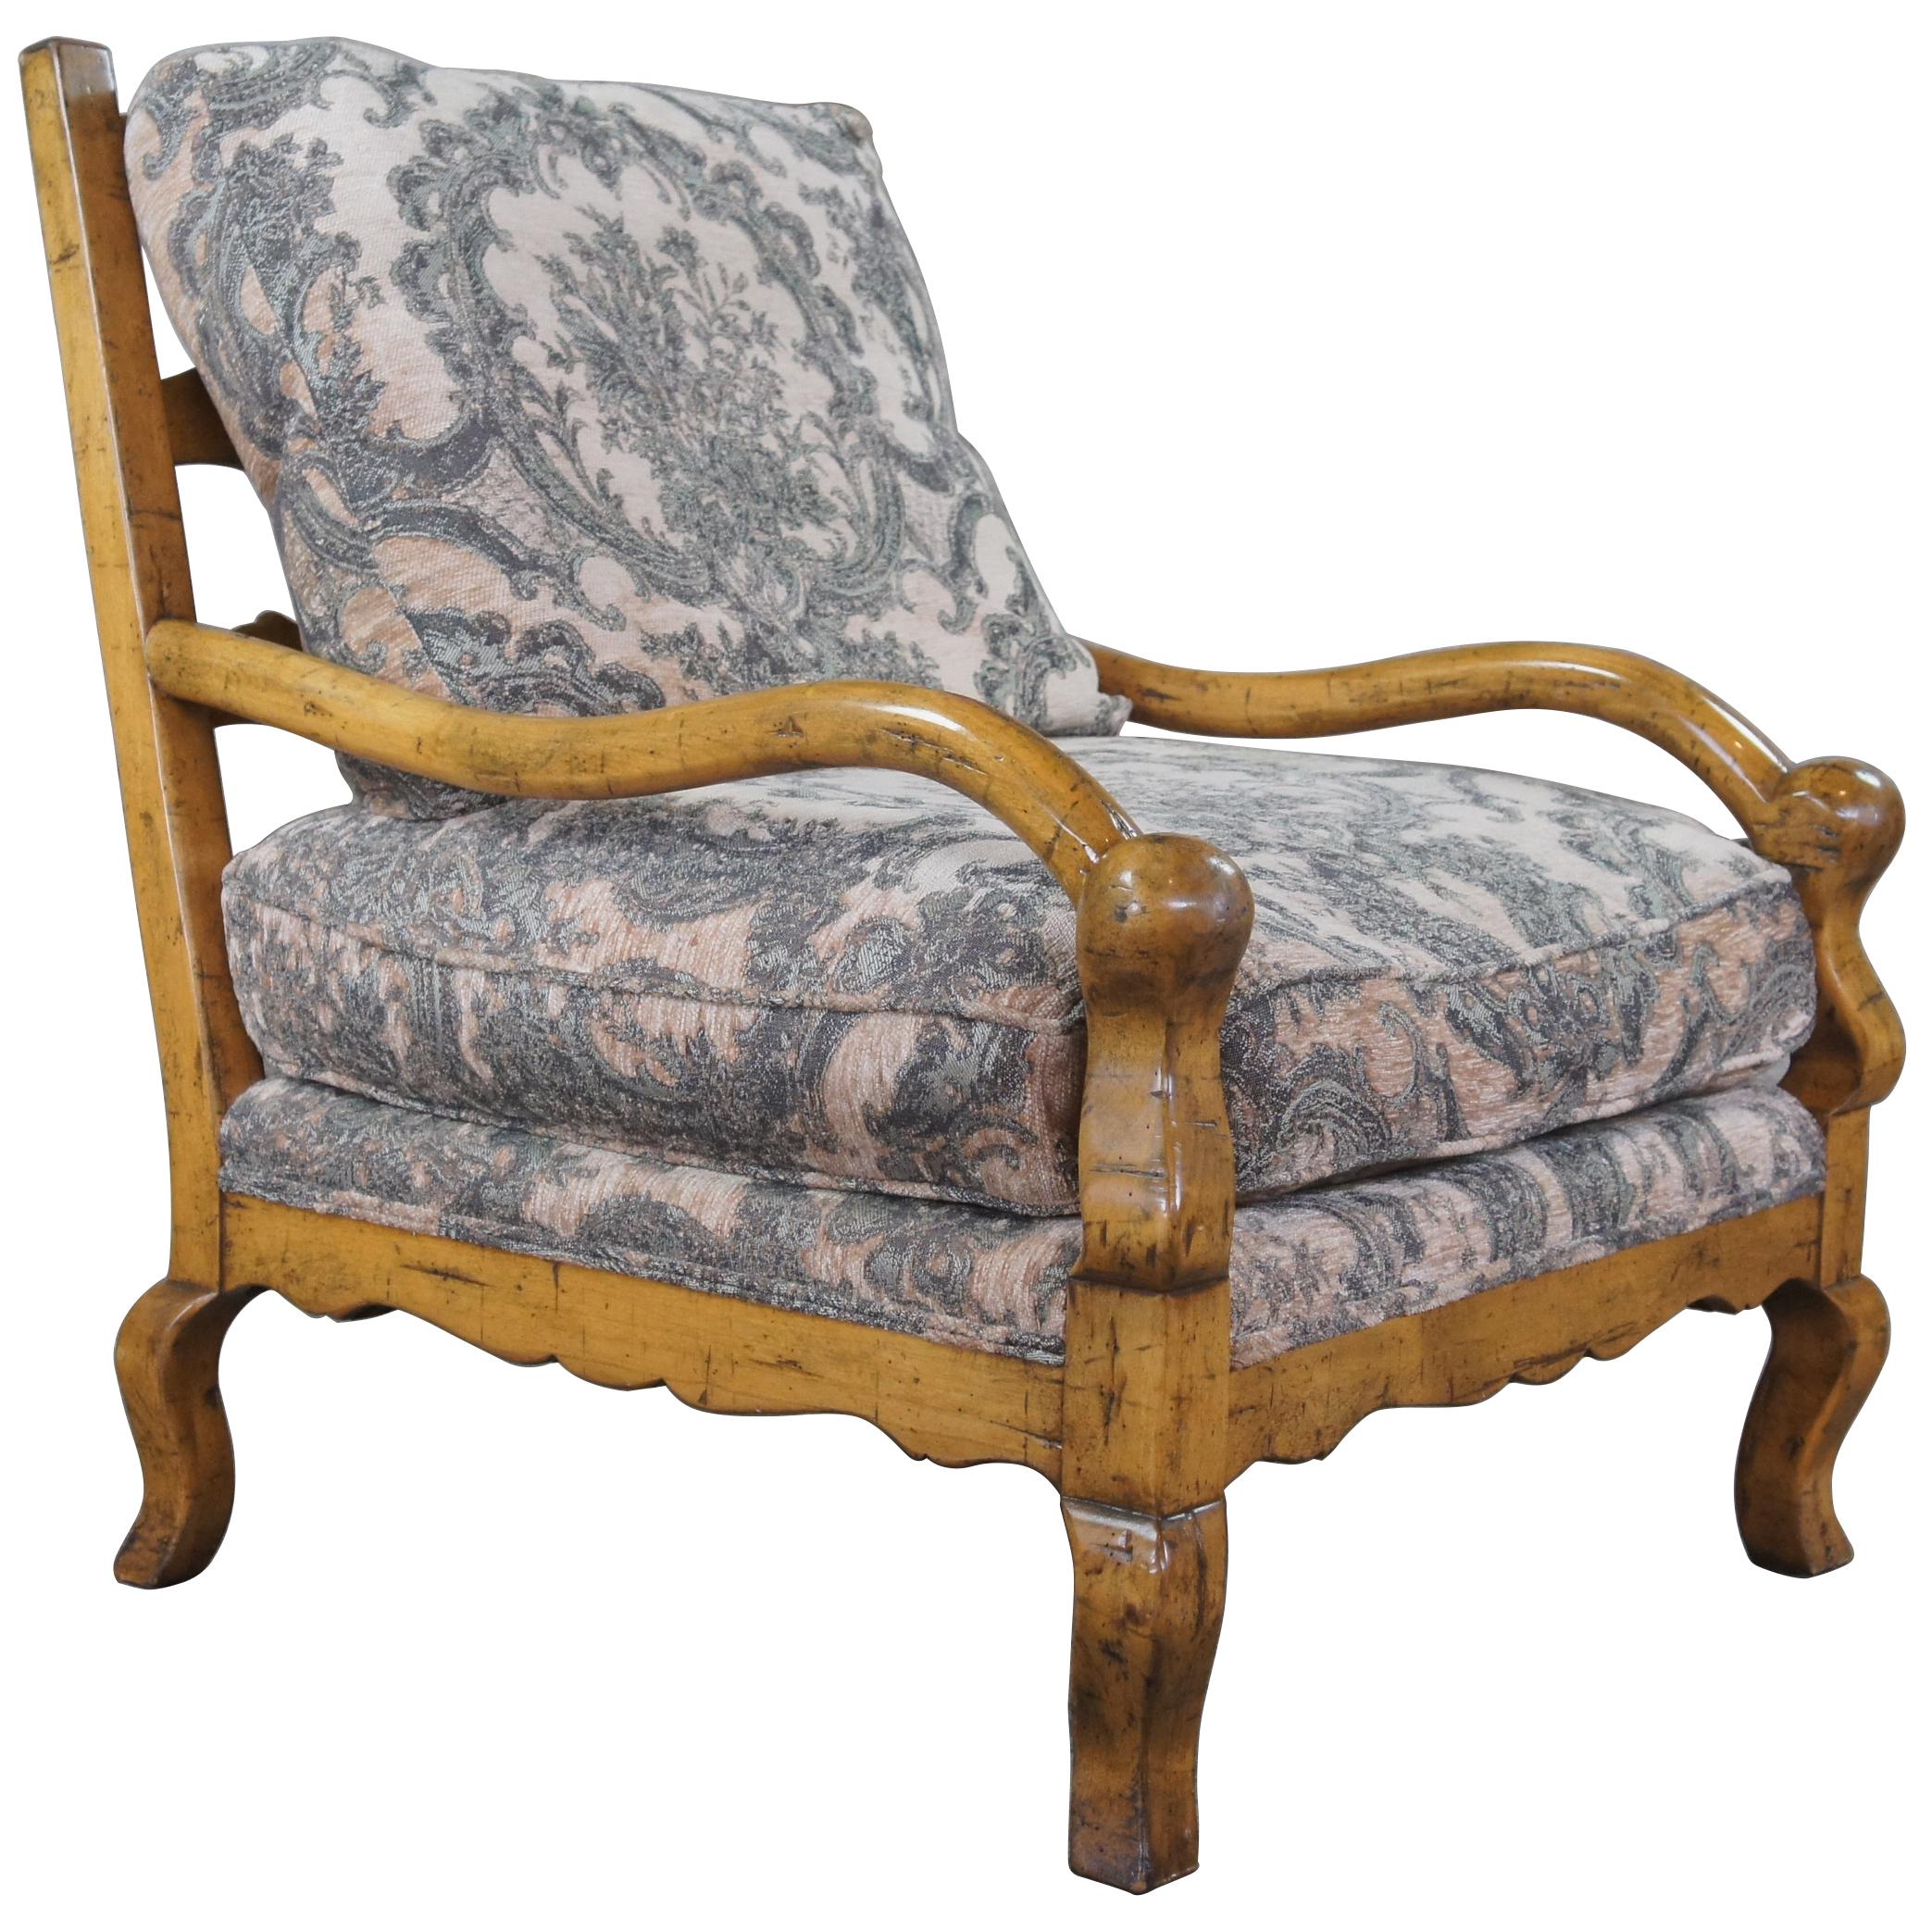 French Provincial Guy Chaddock Country French Oversized Knuckle Lounge Arm Chair Ladderback Uc3001